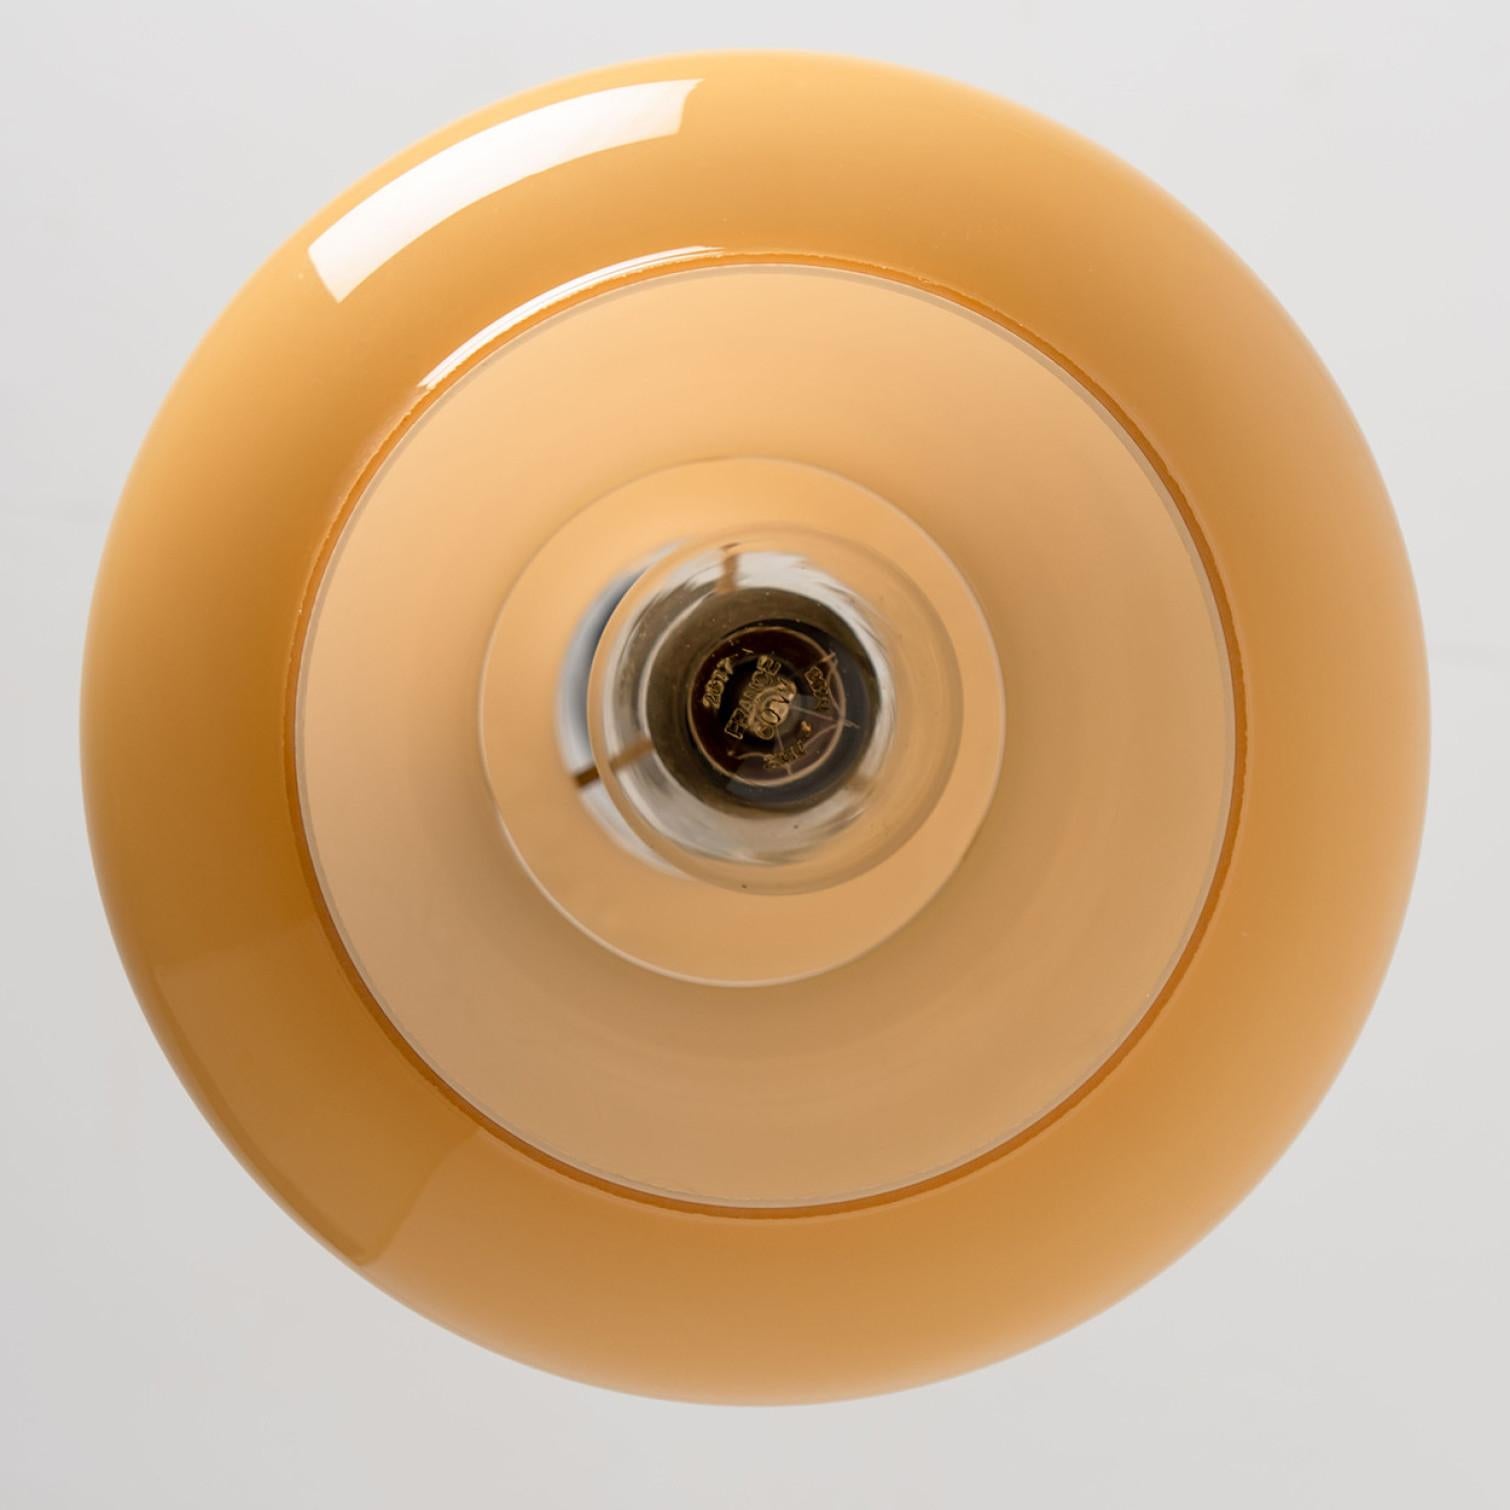 Other Yellow Murano Glass Pendant Light by Massimo Vignelli for Venini, 1960 For Sale